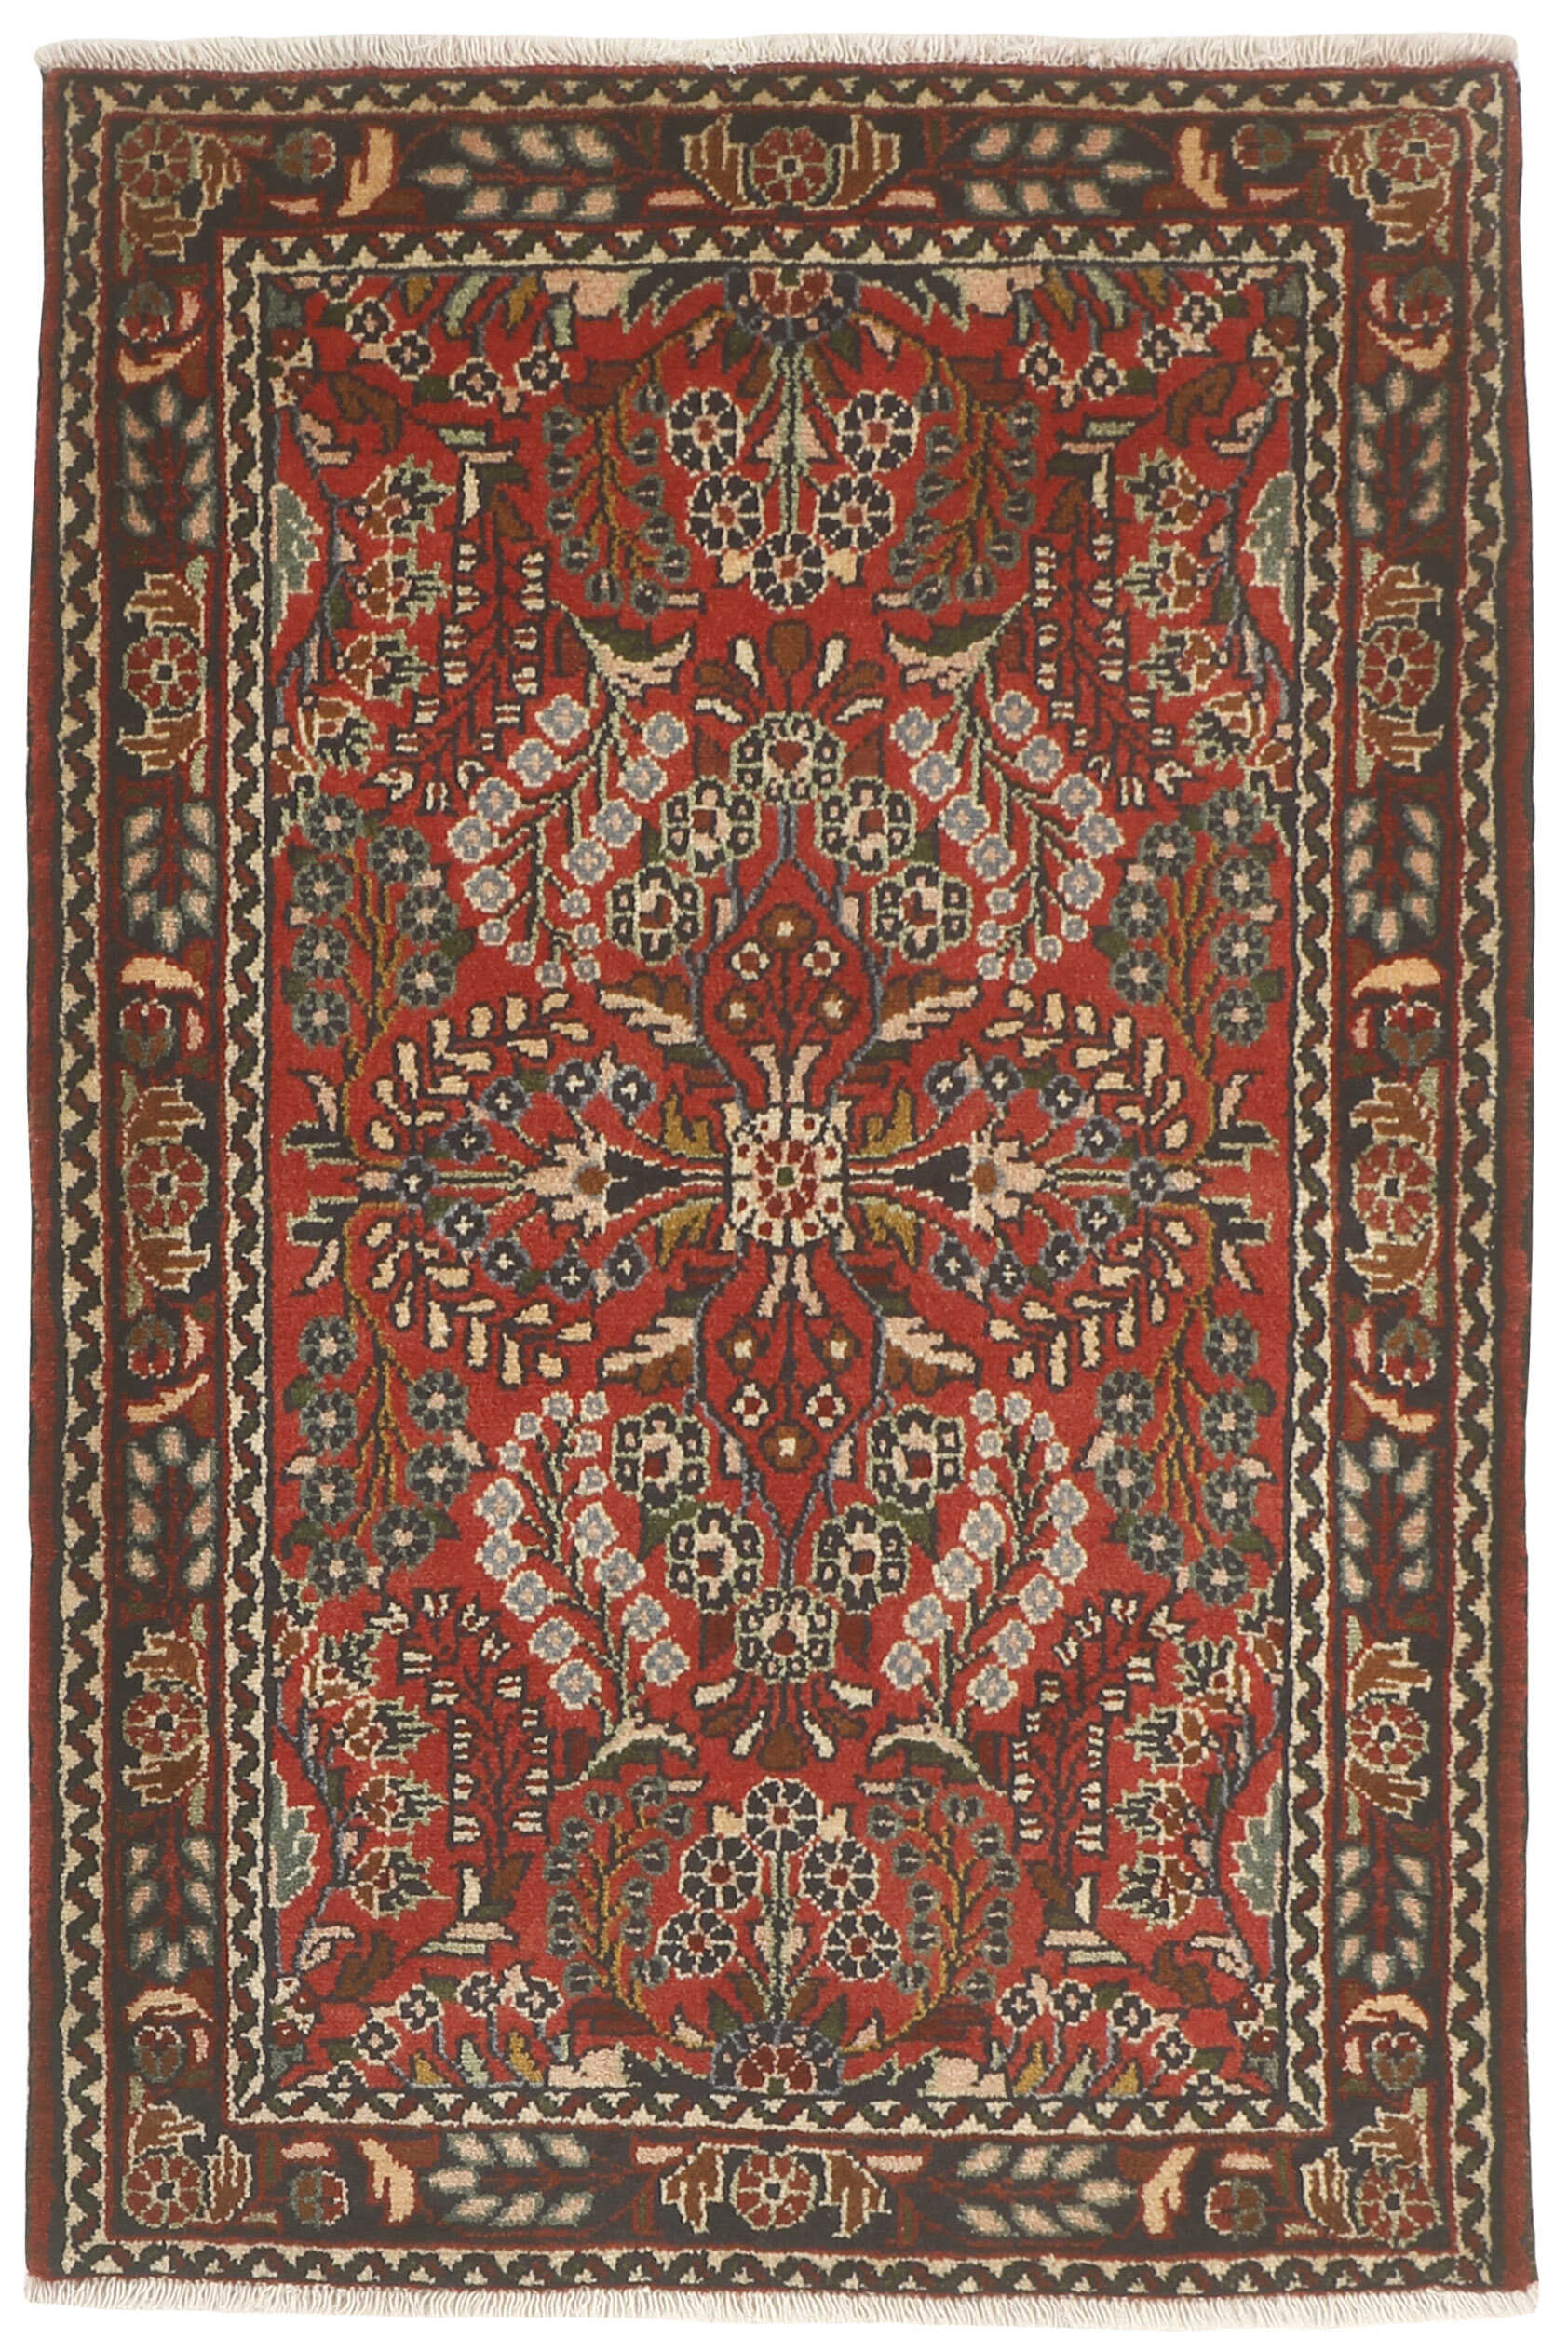 Authentic persian rug with traditional floral design in red